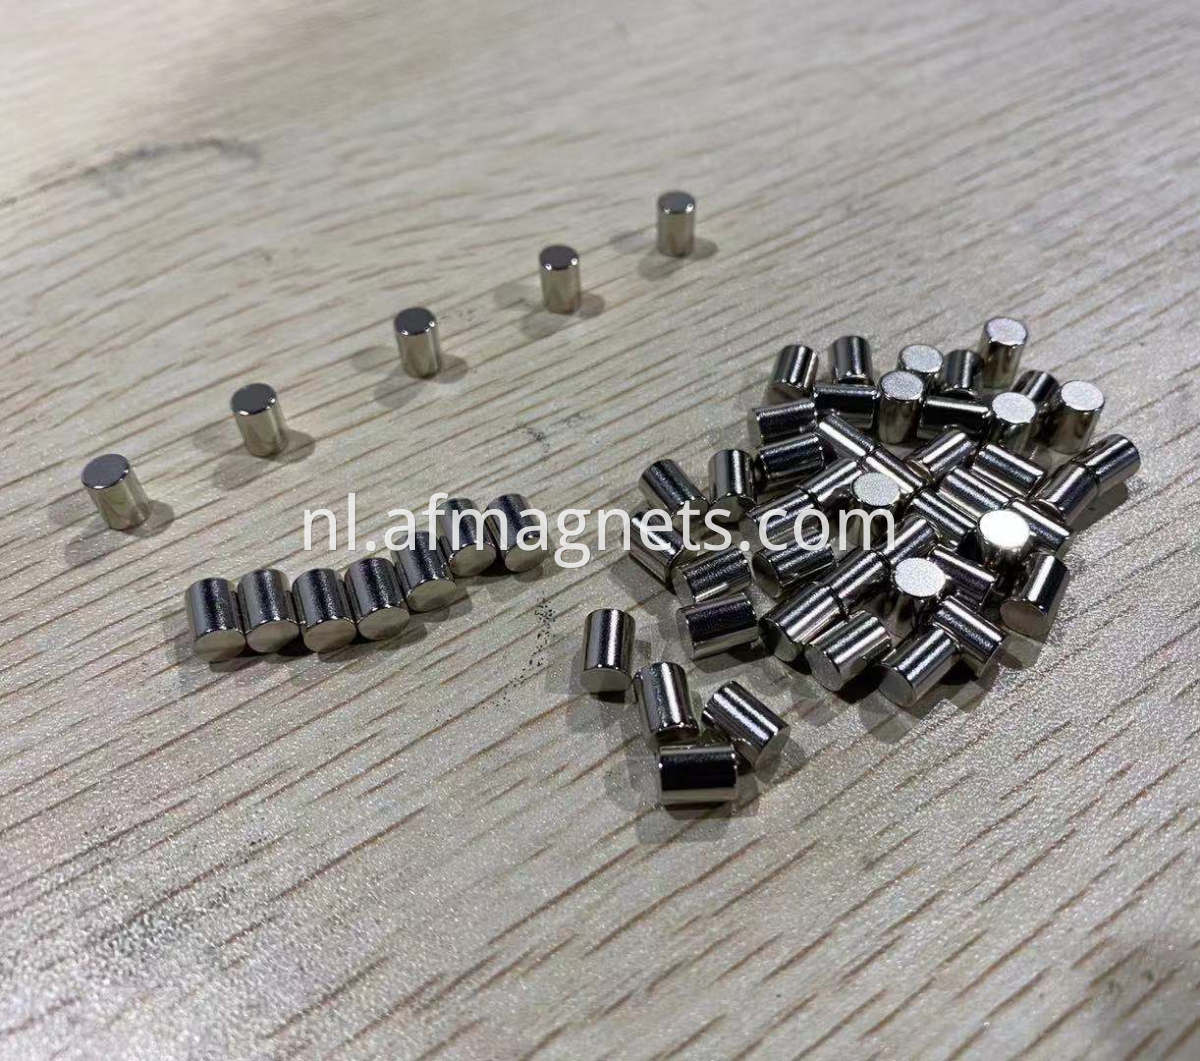 Small Cylinder Magnets